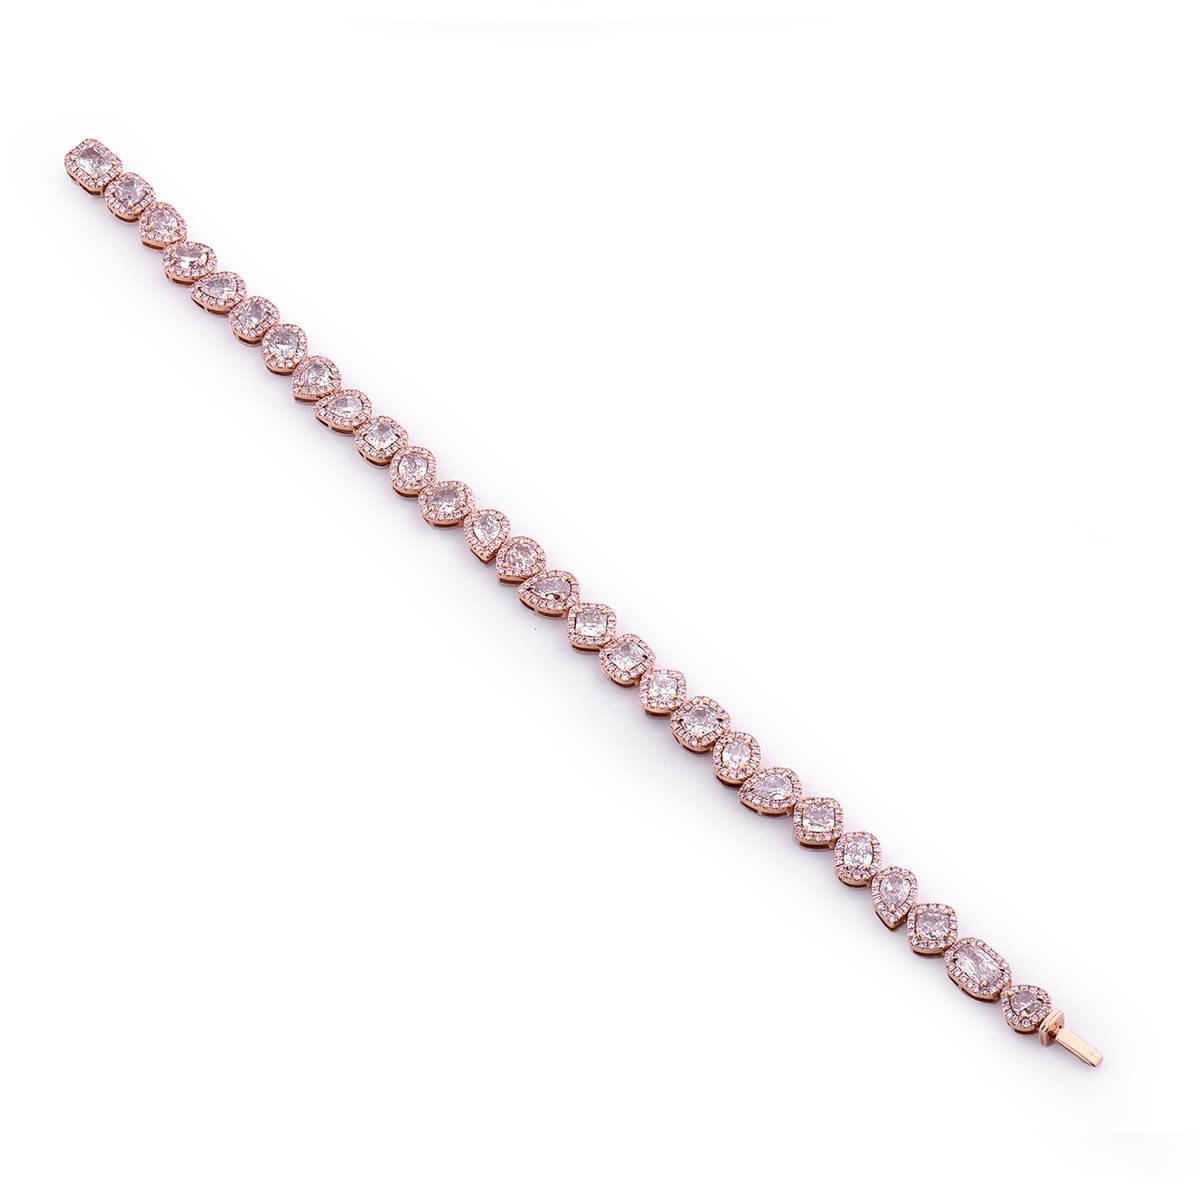 This Beautiful piece consists of 7.33 Carats of Natural untreated pink diamonds, this is the total carat weight of the main pink diamonds and the surrounding smaller pink diamonds. 

This piece has been expertly crafted using 18k Rose Gold and